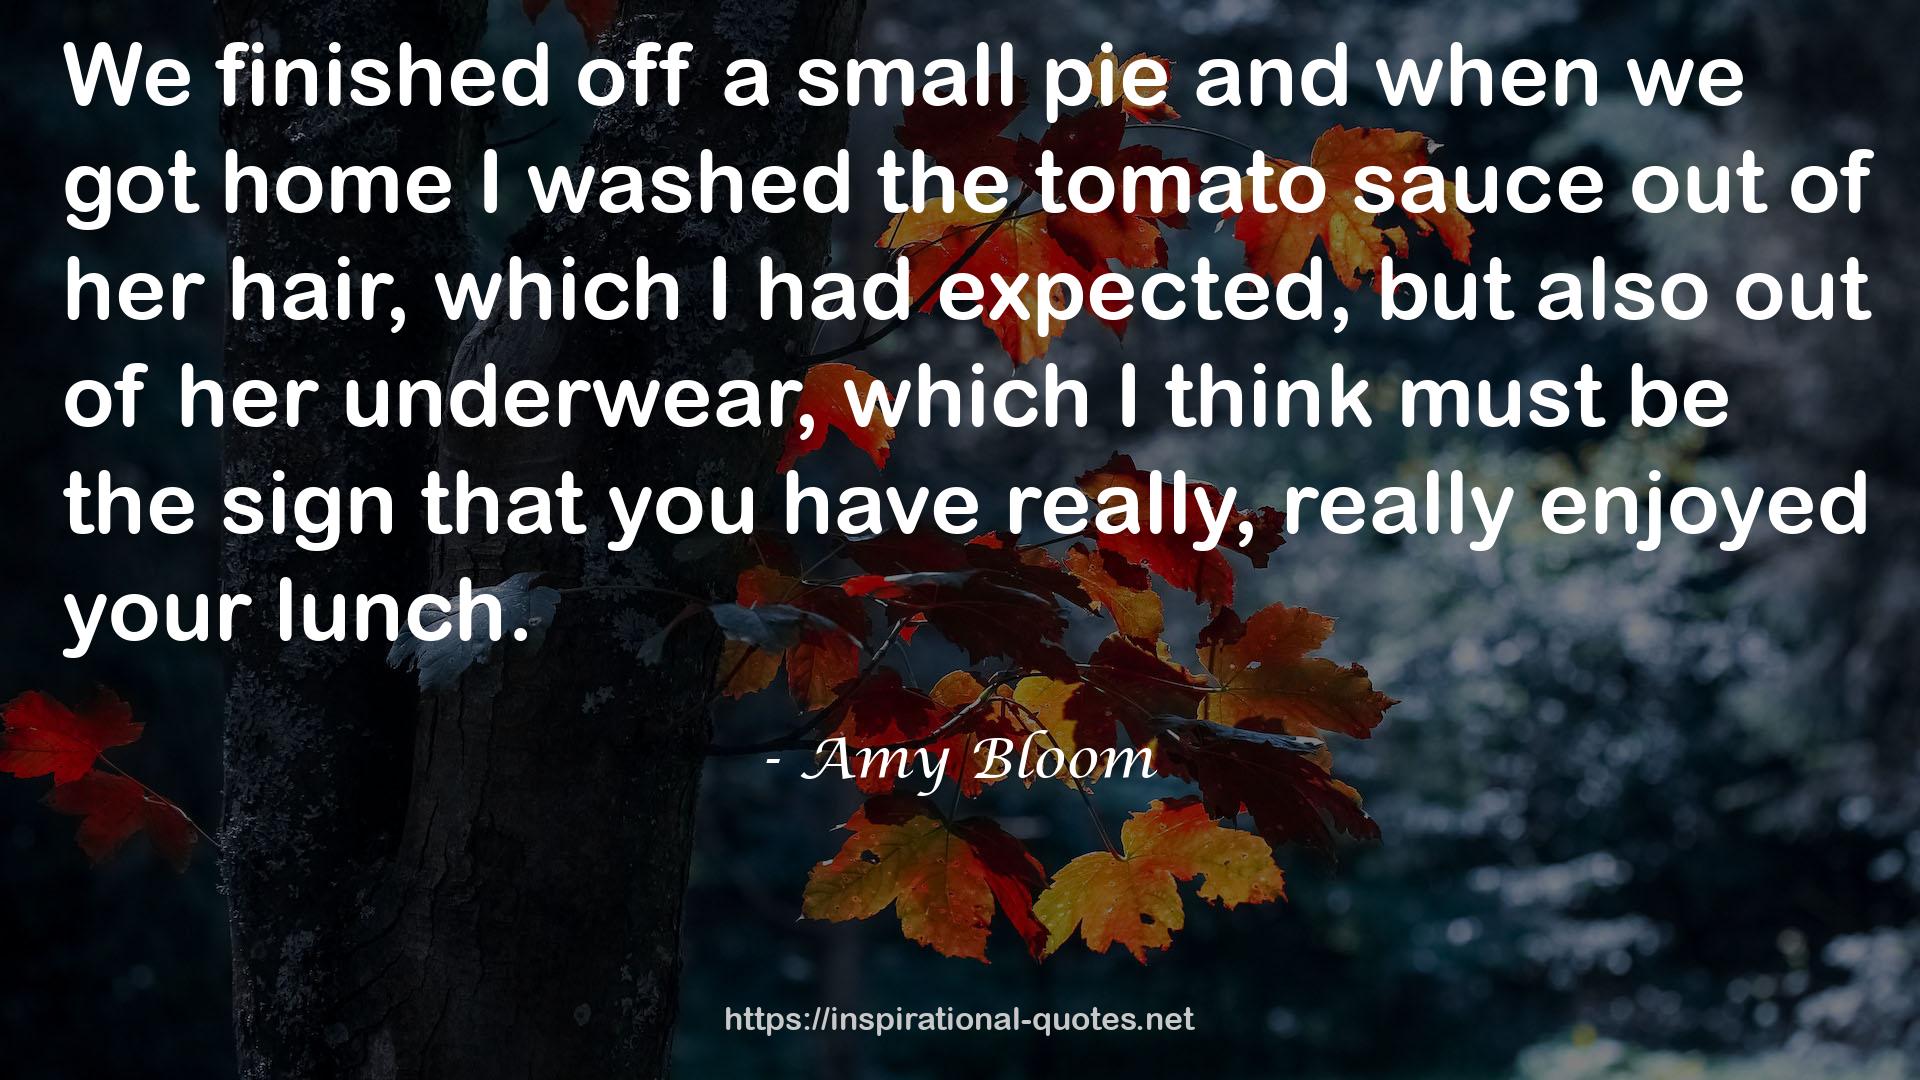 Amy Bloom QUOTES